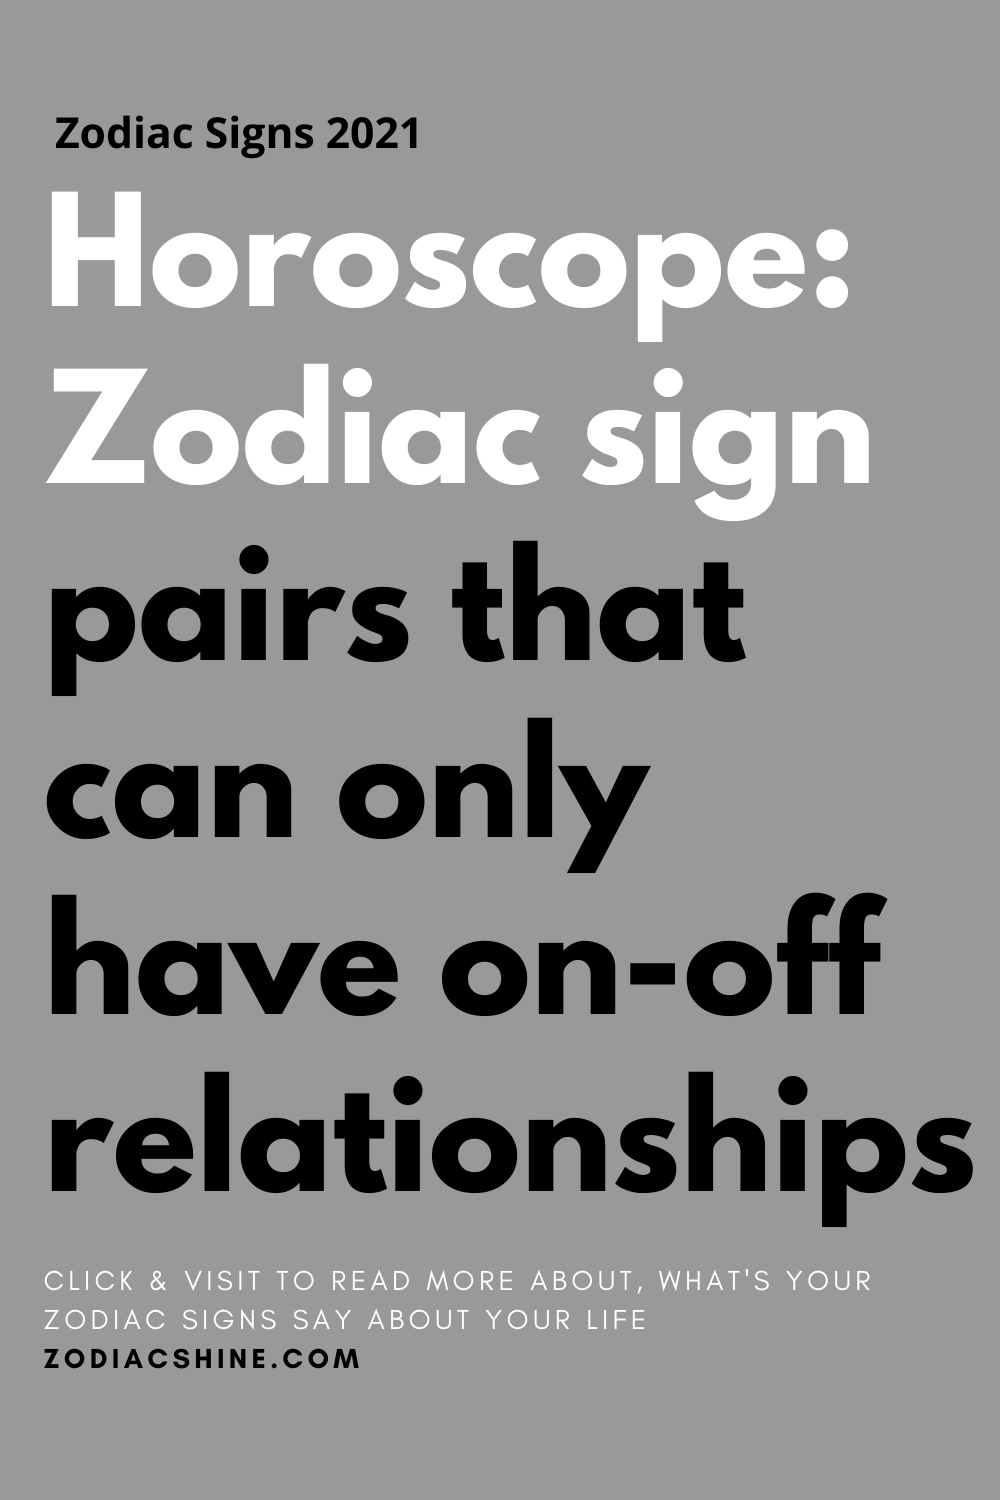 Horoscope: Zodiac sign pairs that can only have on-off relationships ...